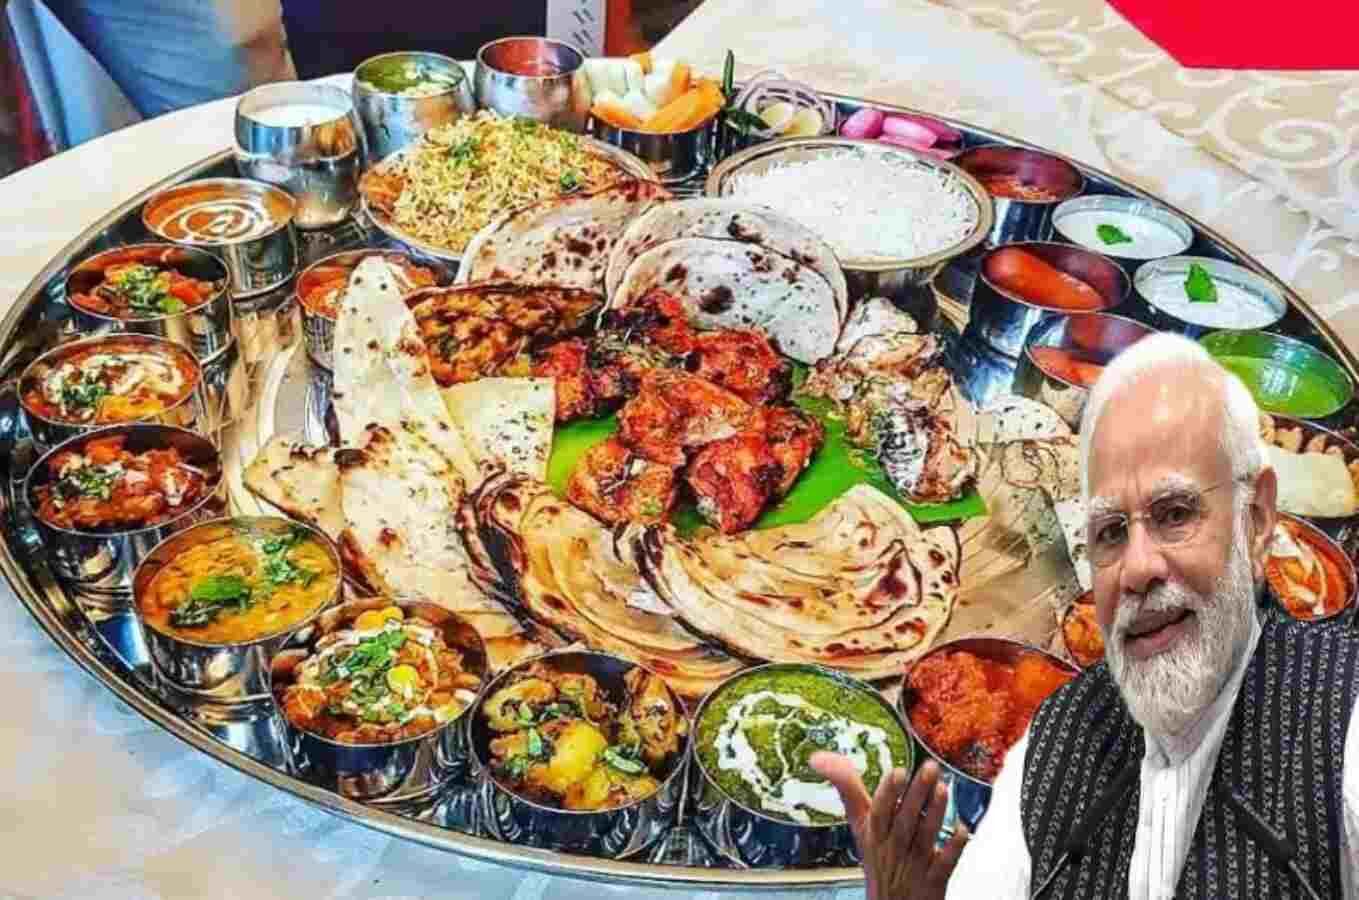 PM Modi Birthday: This restaurant in Delhi will serve 56-inch plate, gold coins will be distributed in Tamil Nadu